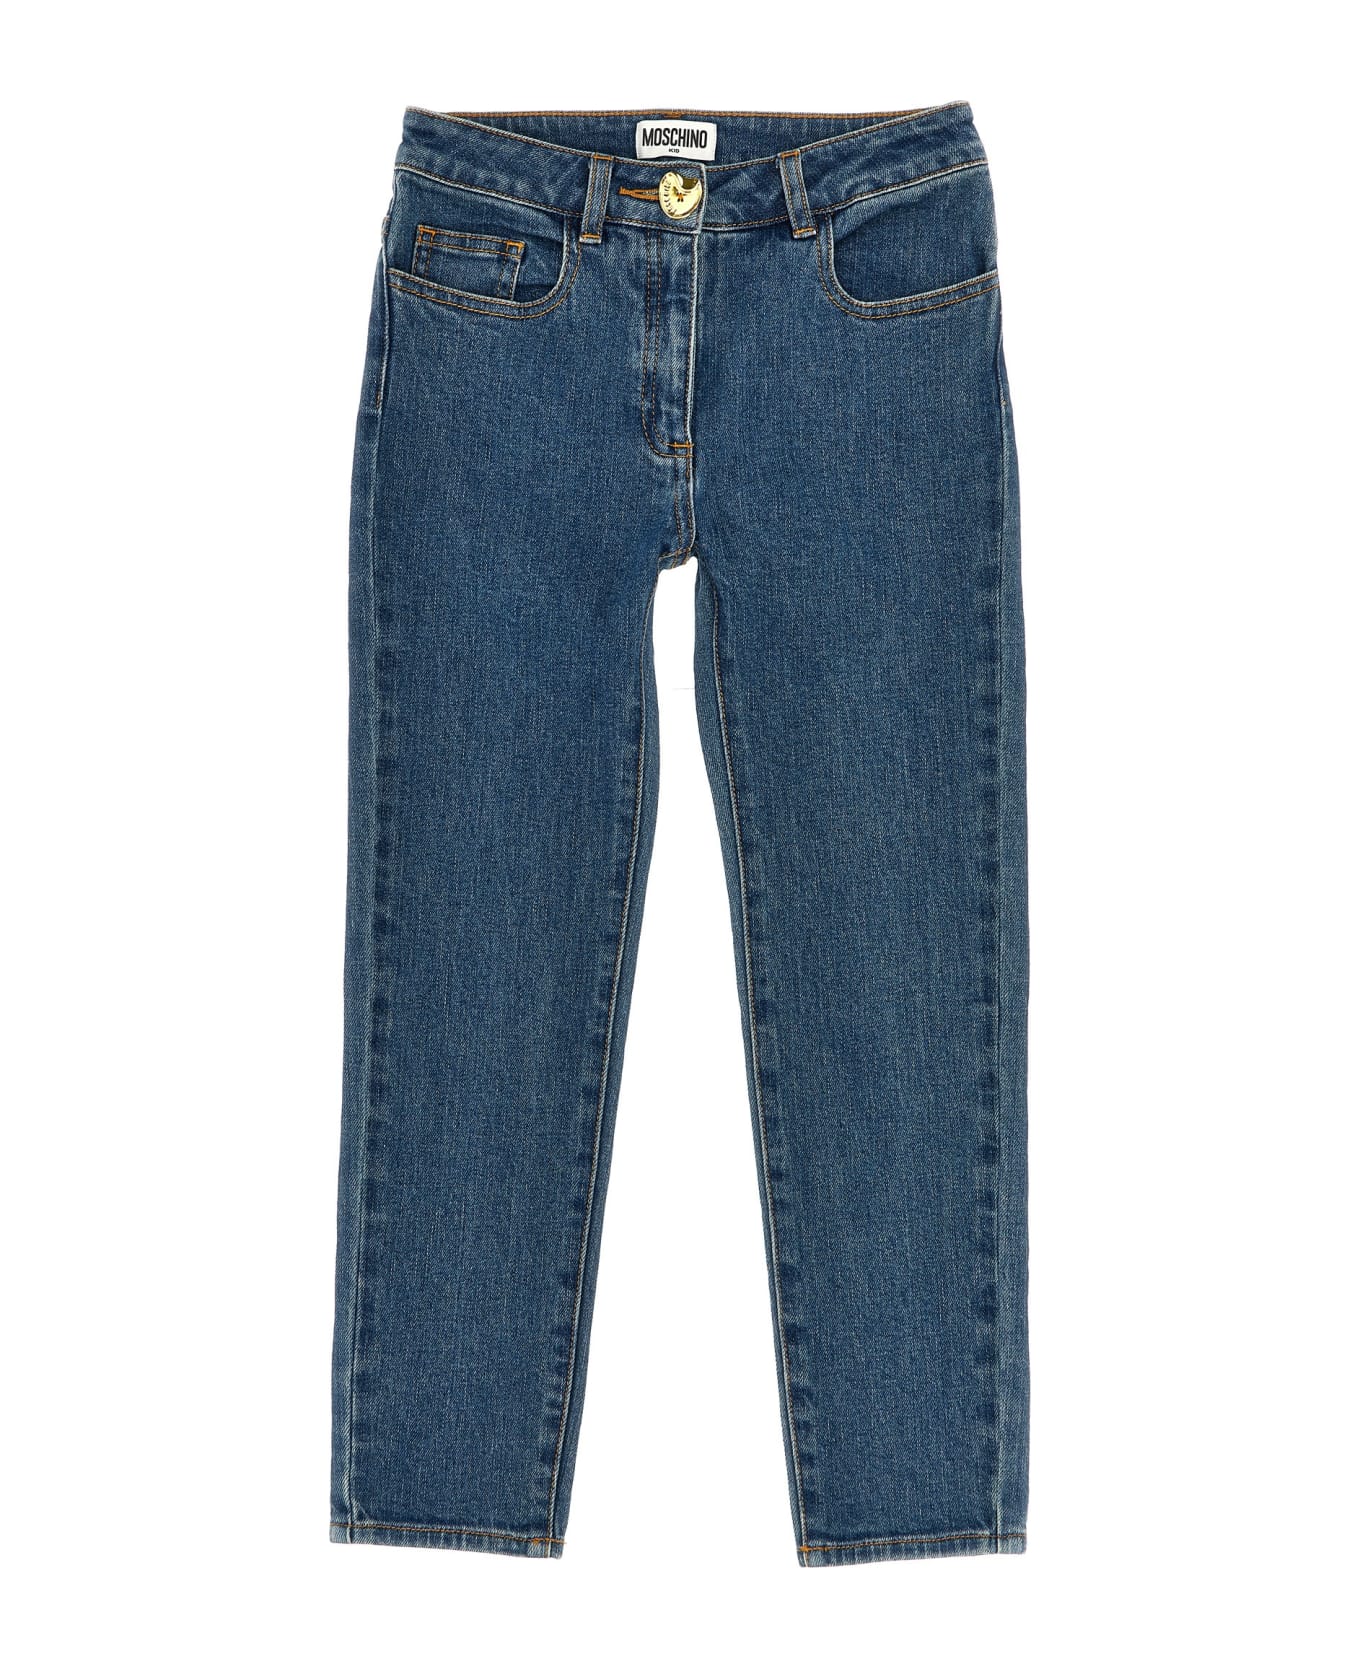 Moschino Button Detail Jeans - Blue